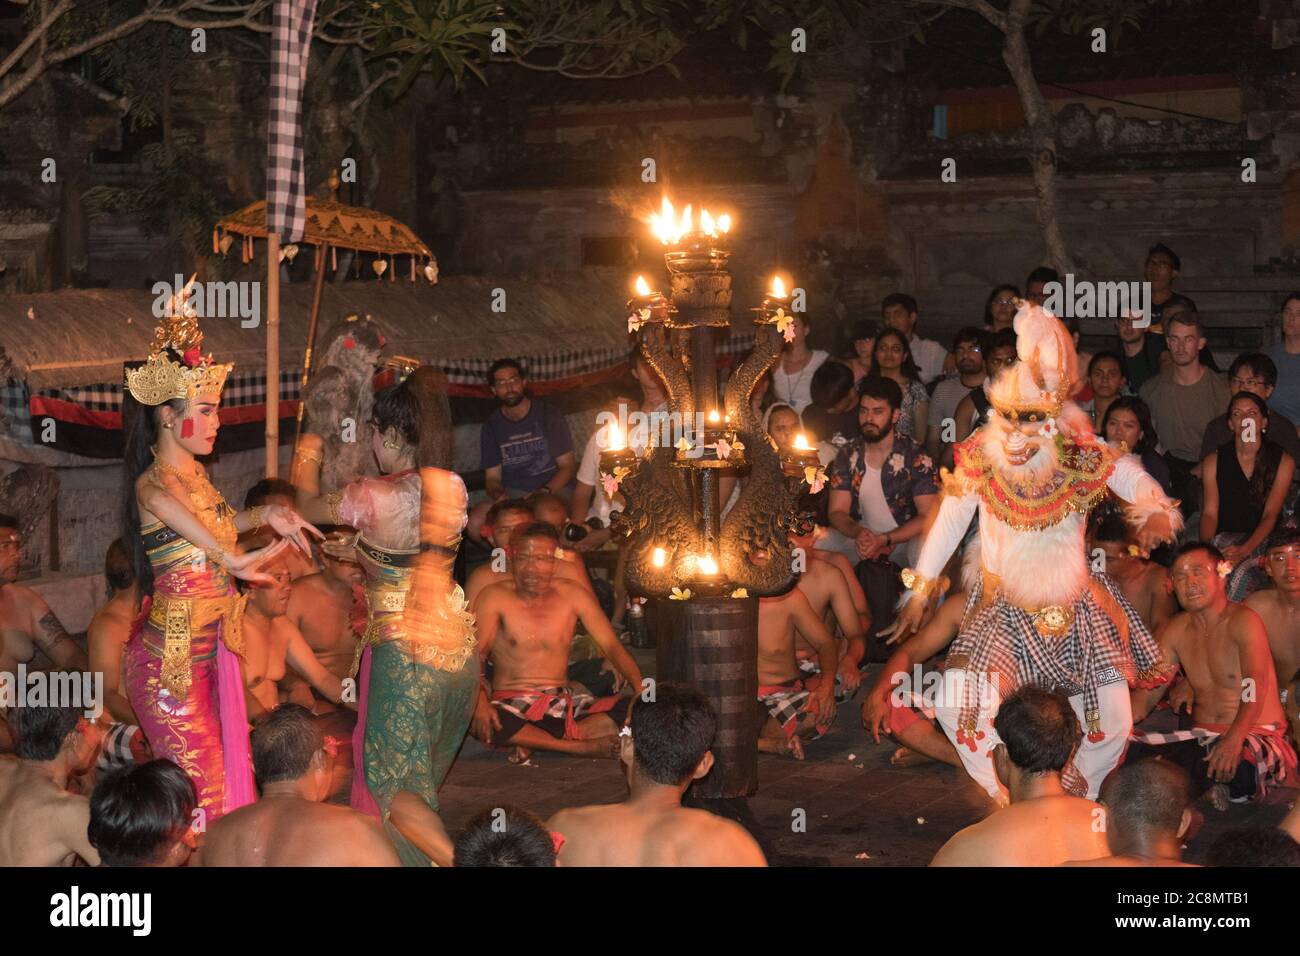 Dramatic photo of colorfully dressed Kecak dancers dressed in traditional, brightly colored costumes perform Balinese Hindu Ramayana Temple dance. Stock Photo